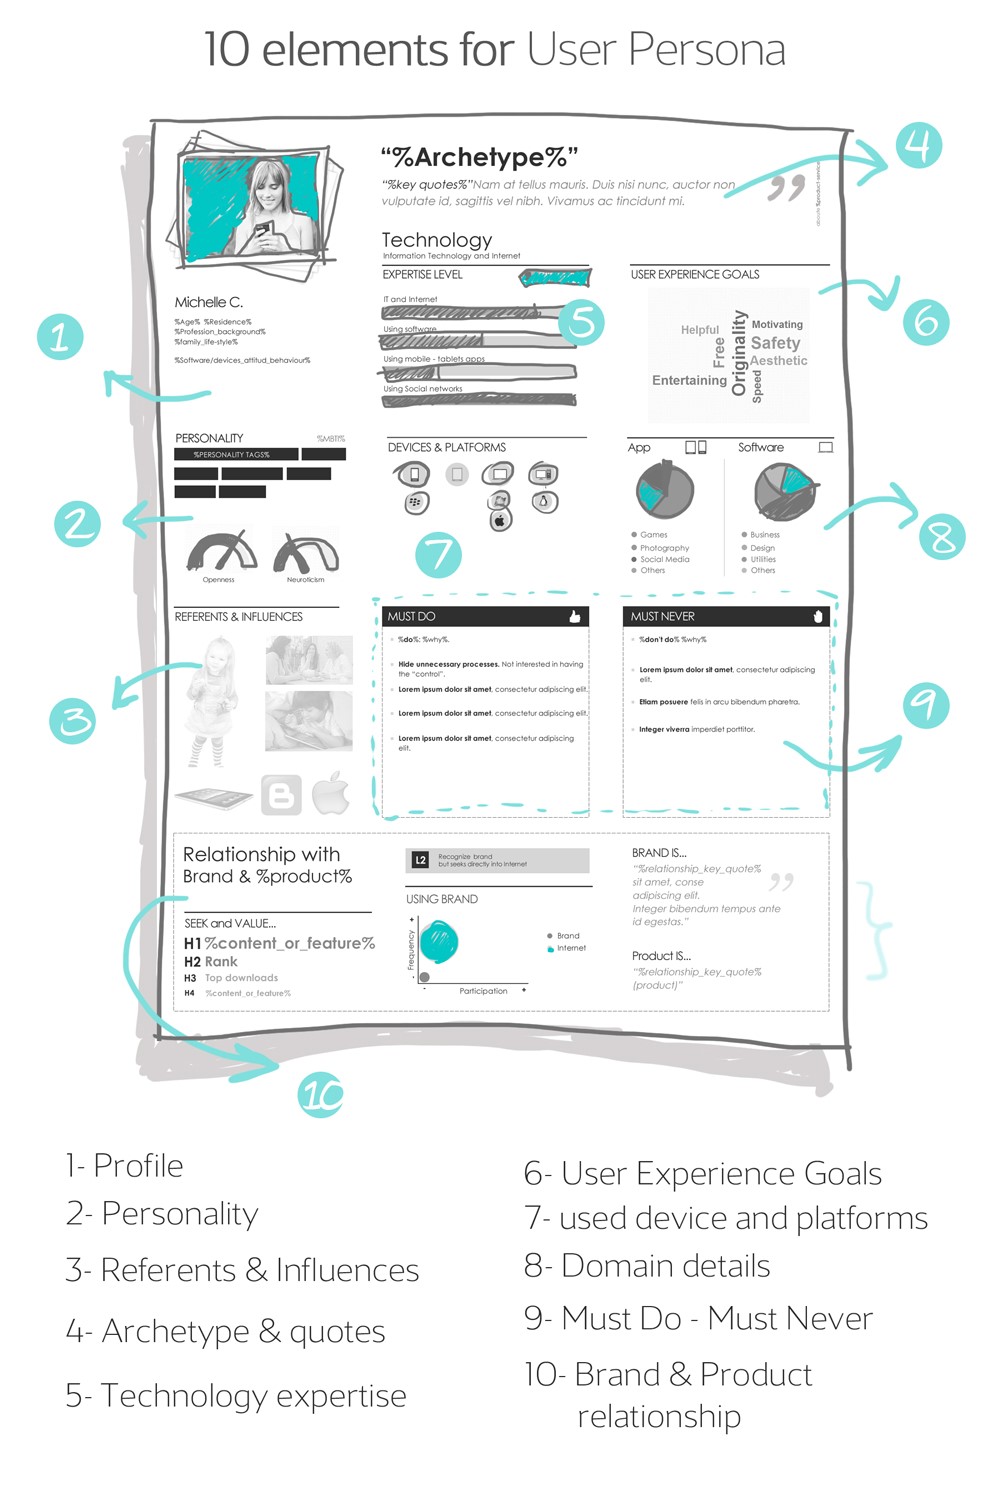 UXLady offers a similar approach to creating user personas. Source: UX-lady.com